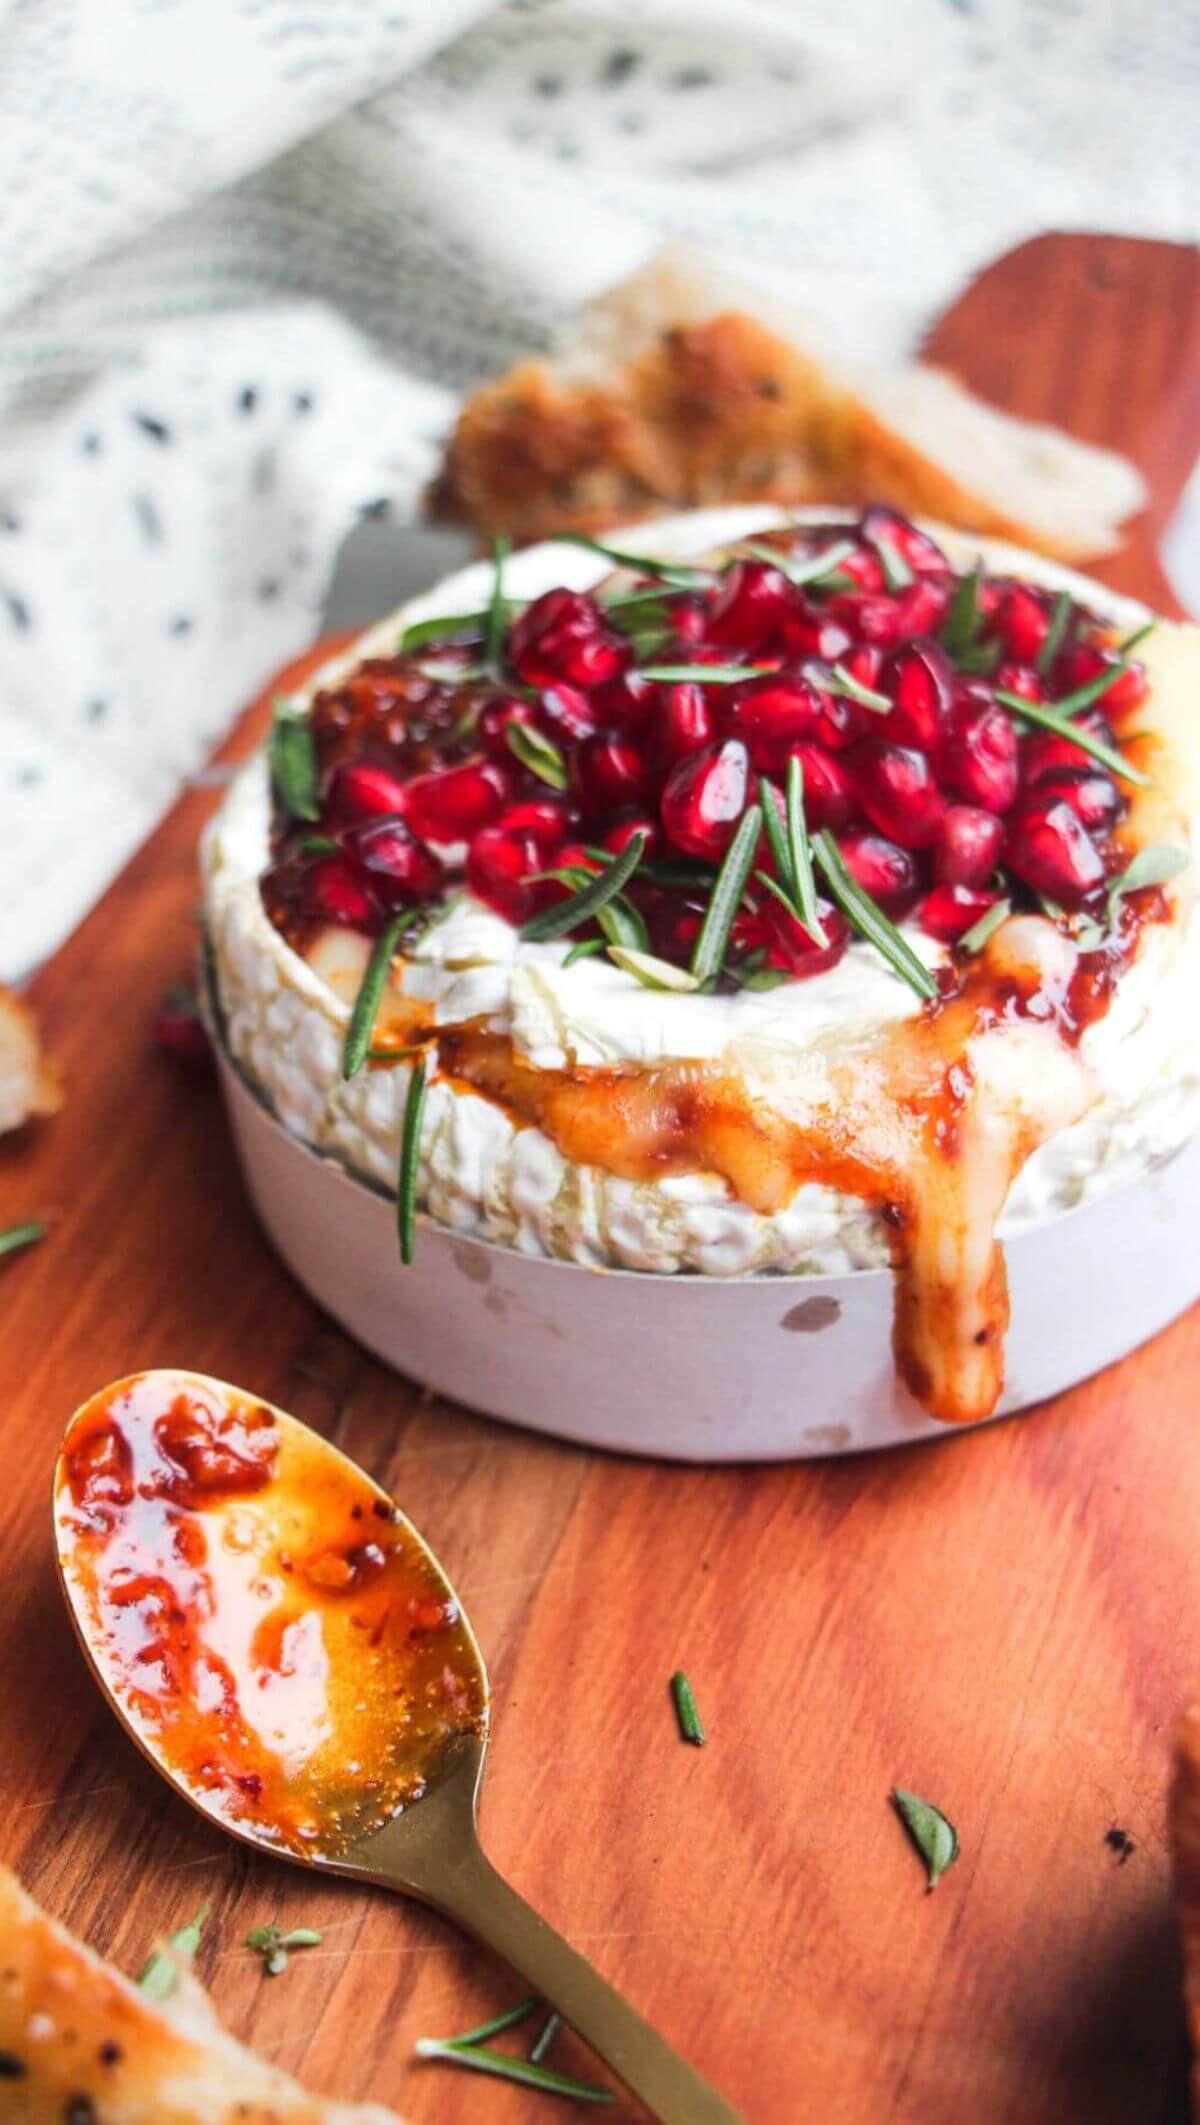 Wheel of camembert on a wooden board with oozy cheese spilling out, topped with pomegranate seeds and herbs.